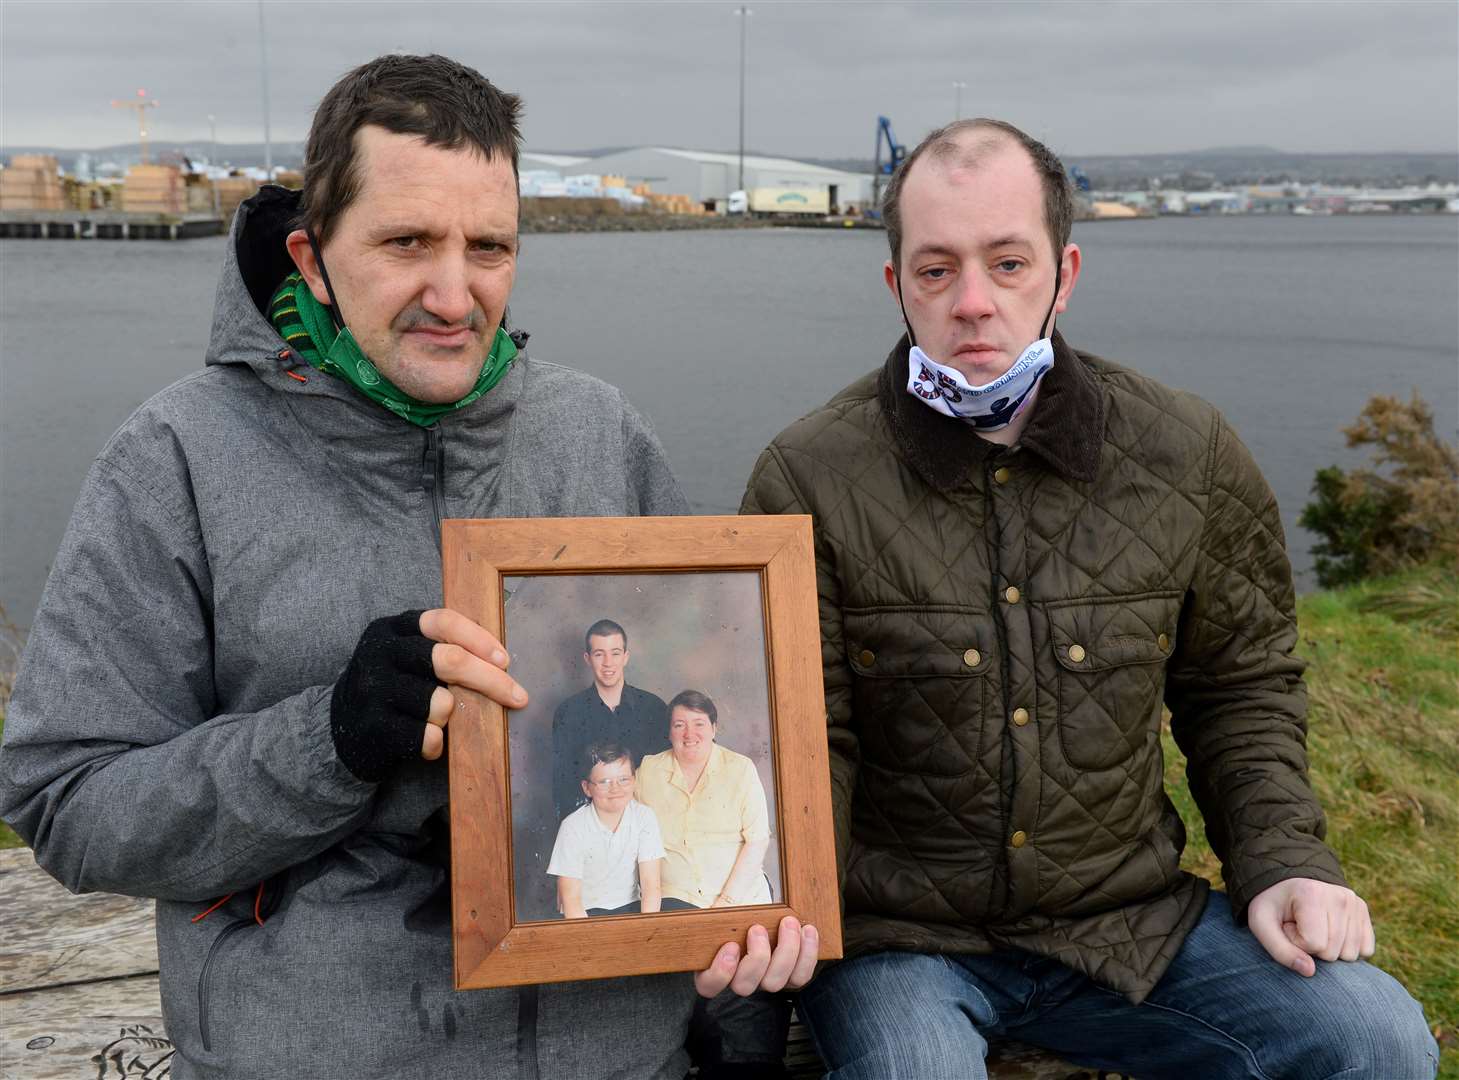 Daniel MacKenzie(left) and Kevin MacKenzie were trying to raise funds for Jane's funeral costs.